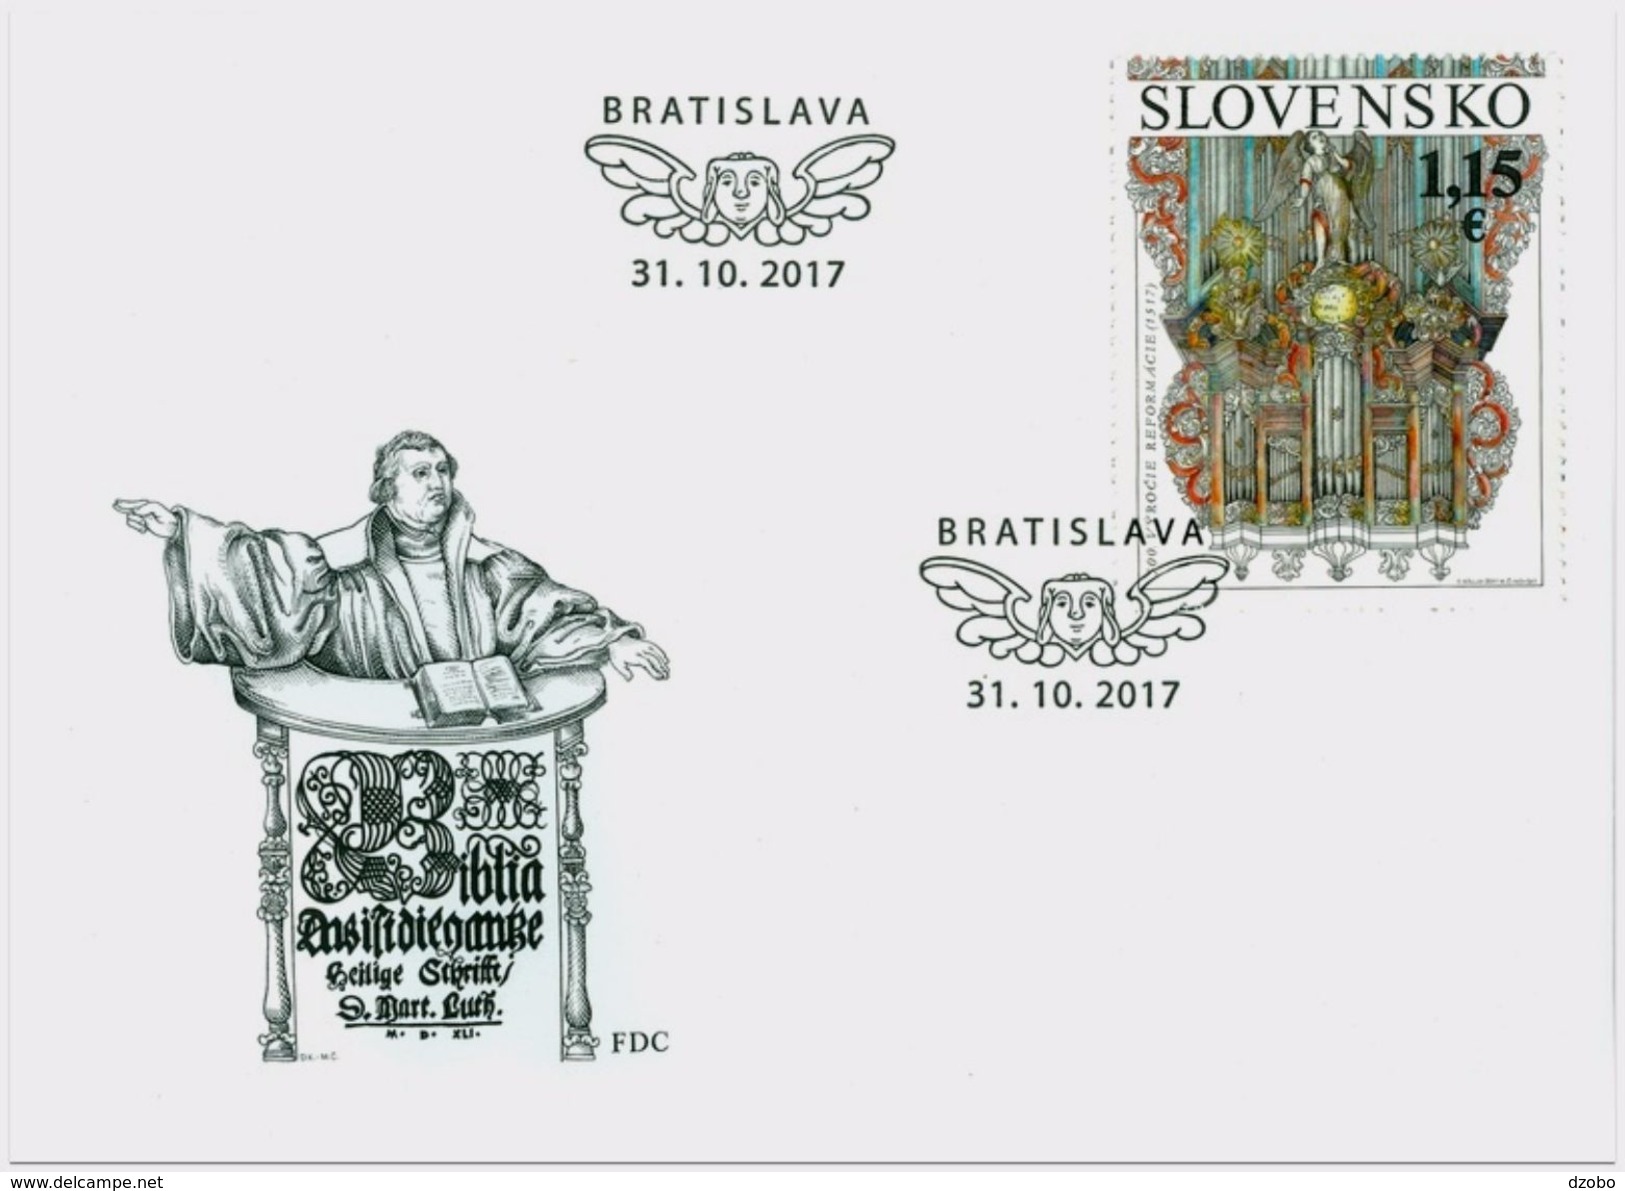 184-SLOVAKIA-FDC Small The 500th Anniv. Of The Reformation 1517 Martin LUTHER Evangelicals & Protestants 3.100 Pcs 2017 - FDC